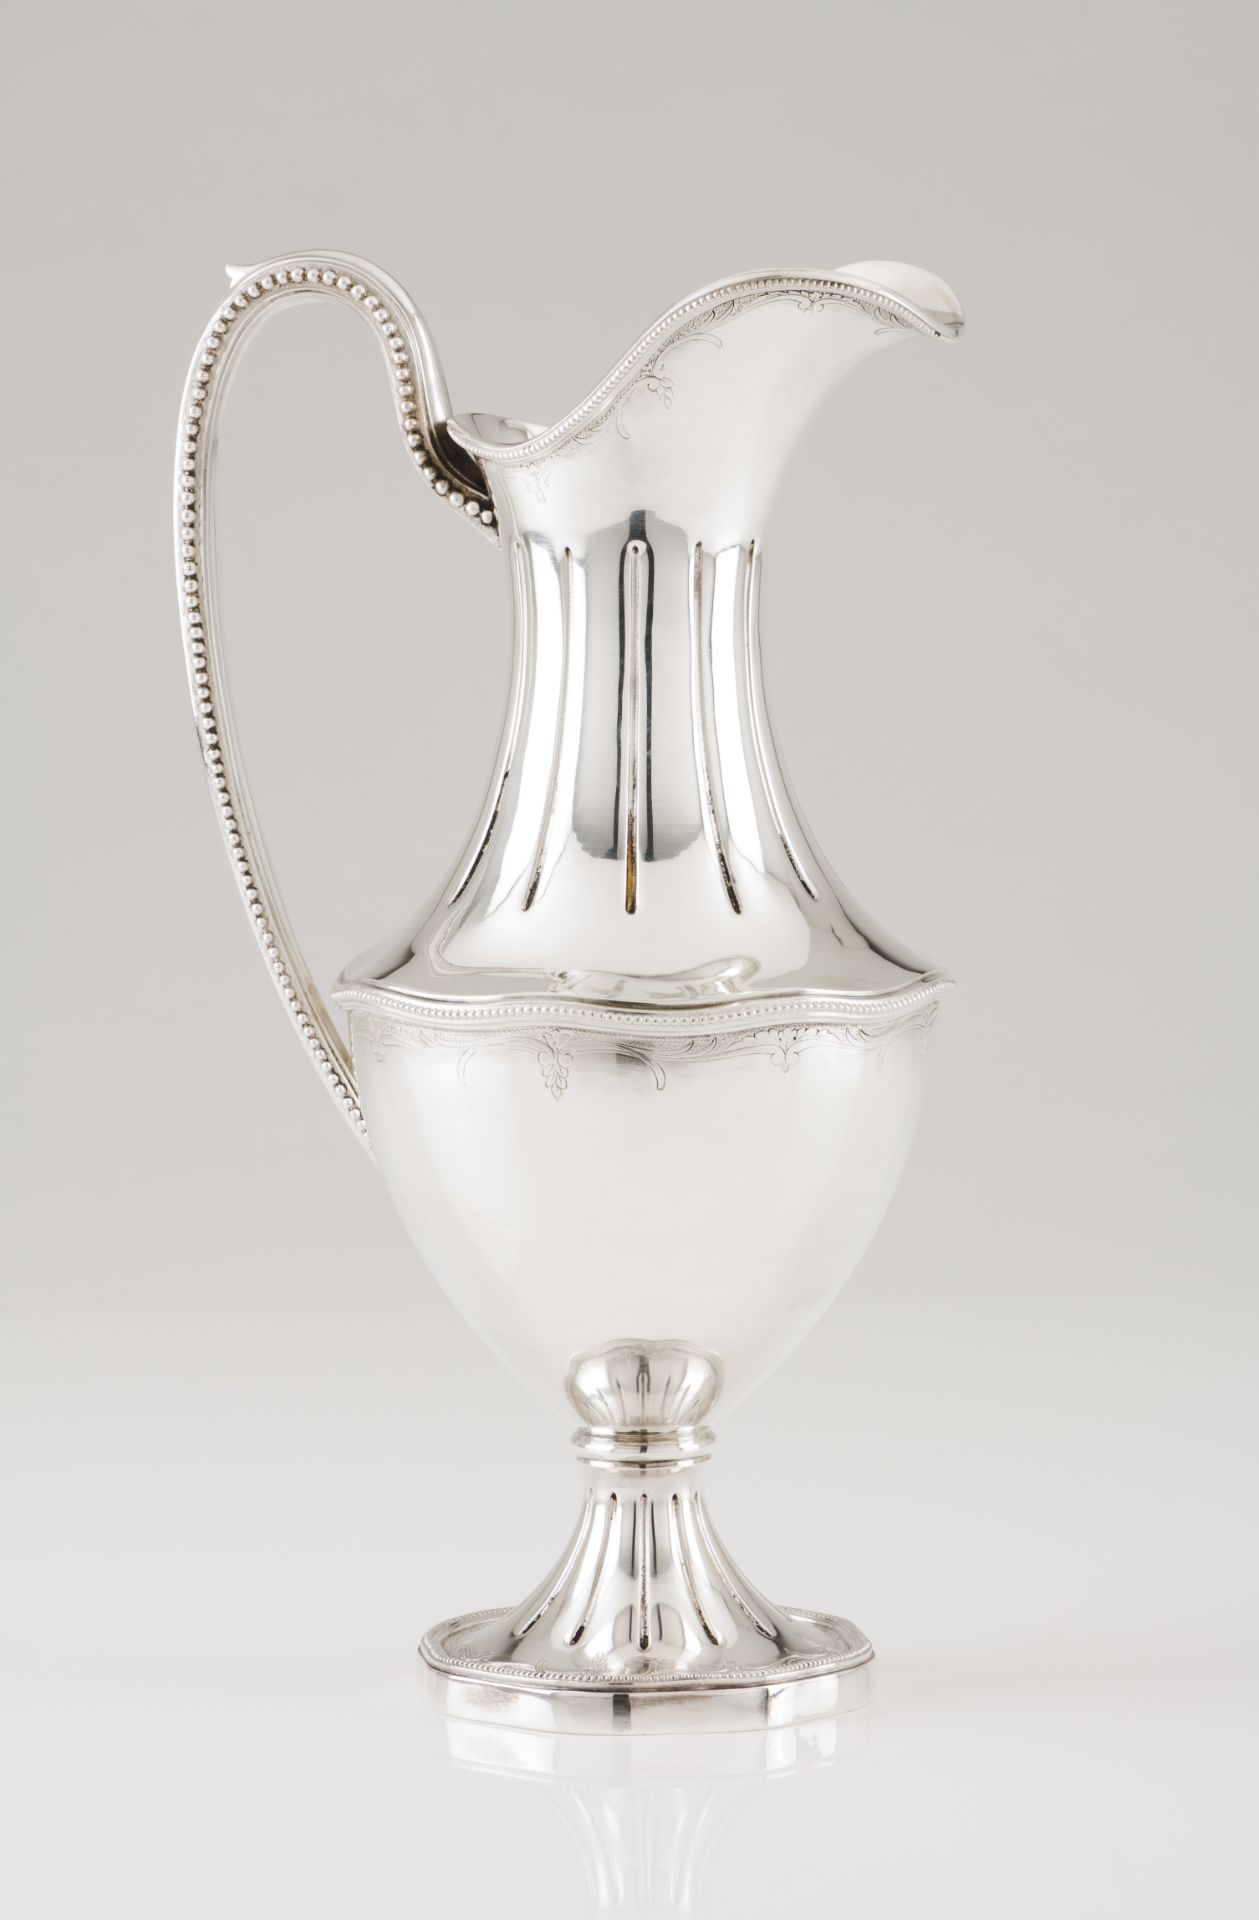 A wine jugPortuguese silver Lip and foot of grooved decoration and beaded frieze Undulating body